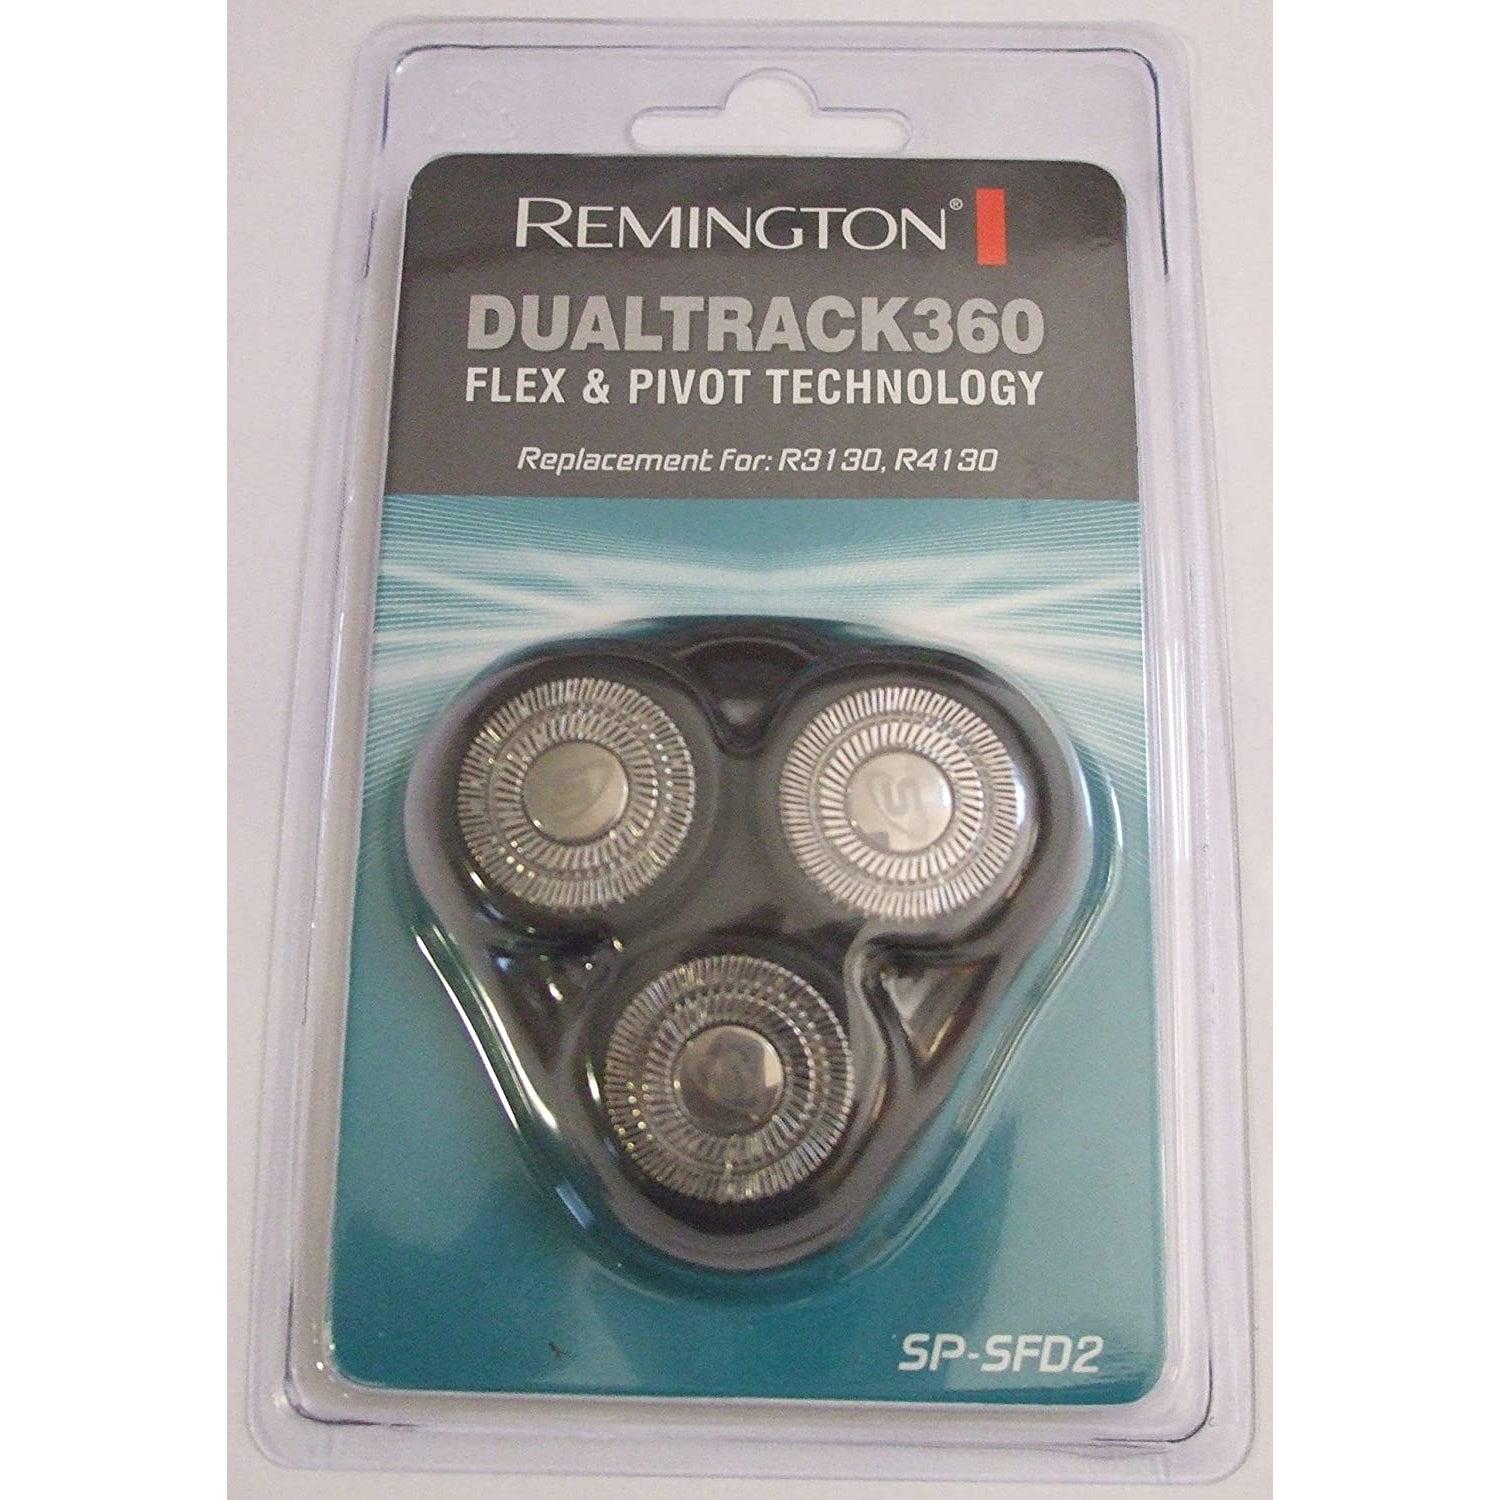 Remington SPSFD2 Dual Track Replacement Rotary Shaver Head Fits R3130 R4130 - Healthxpress.ie